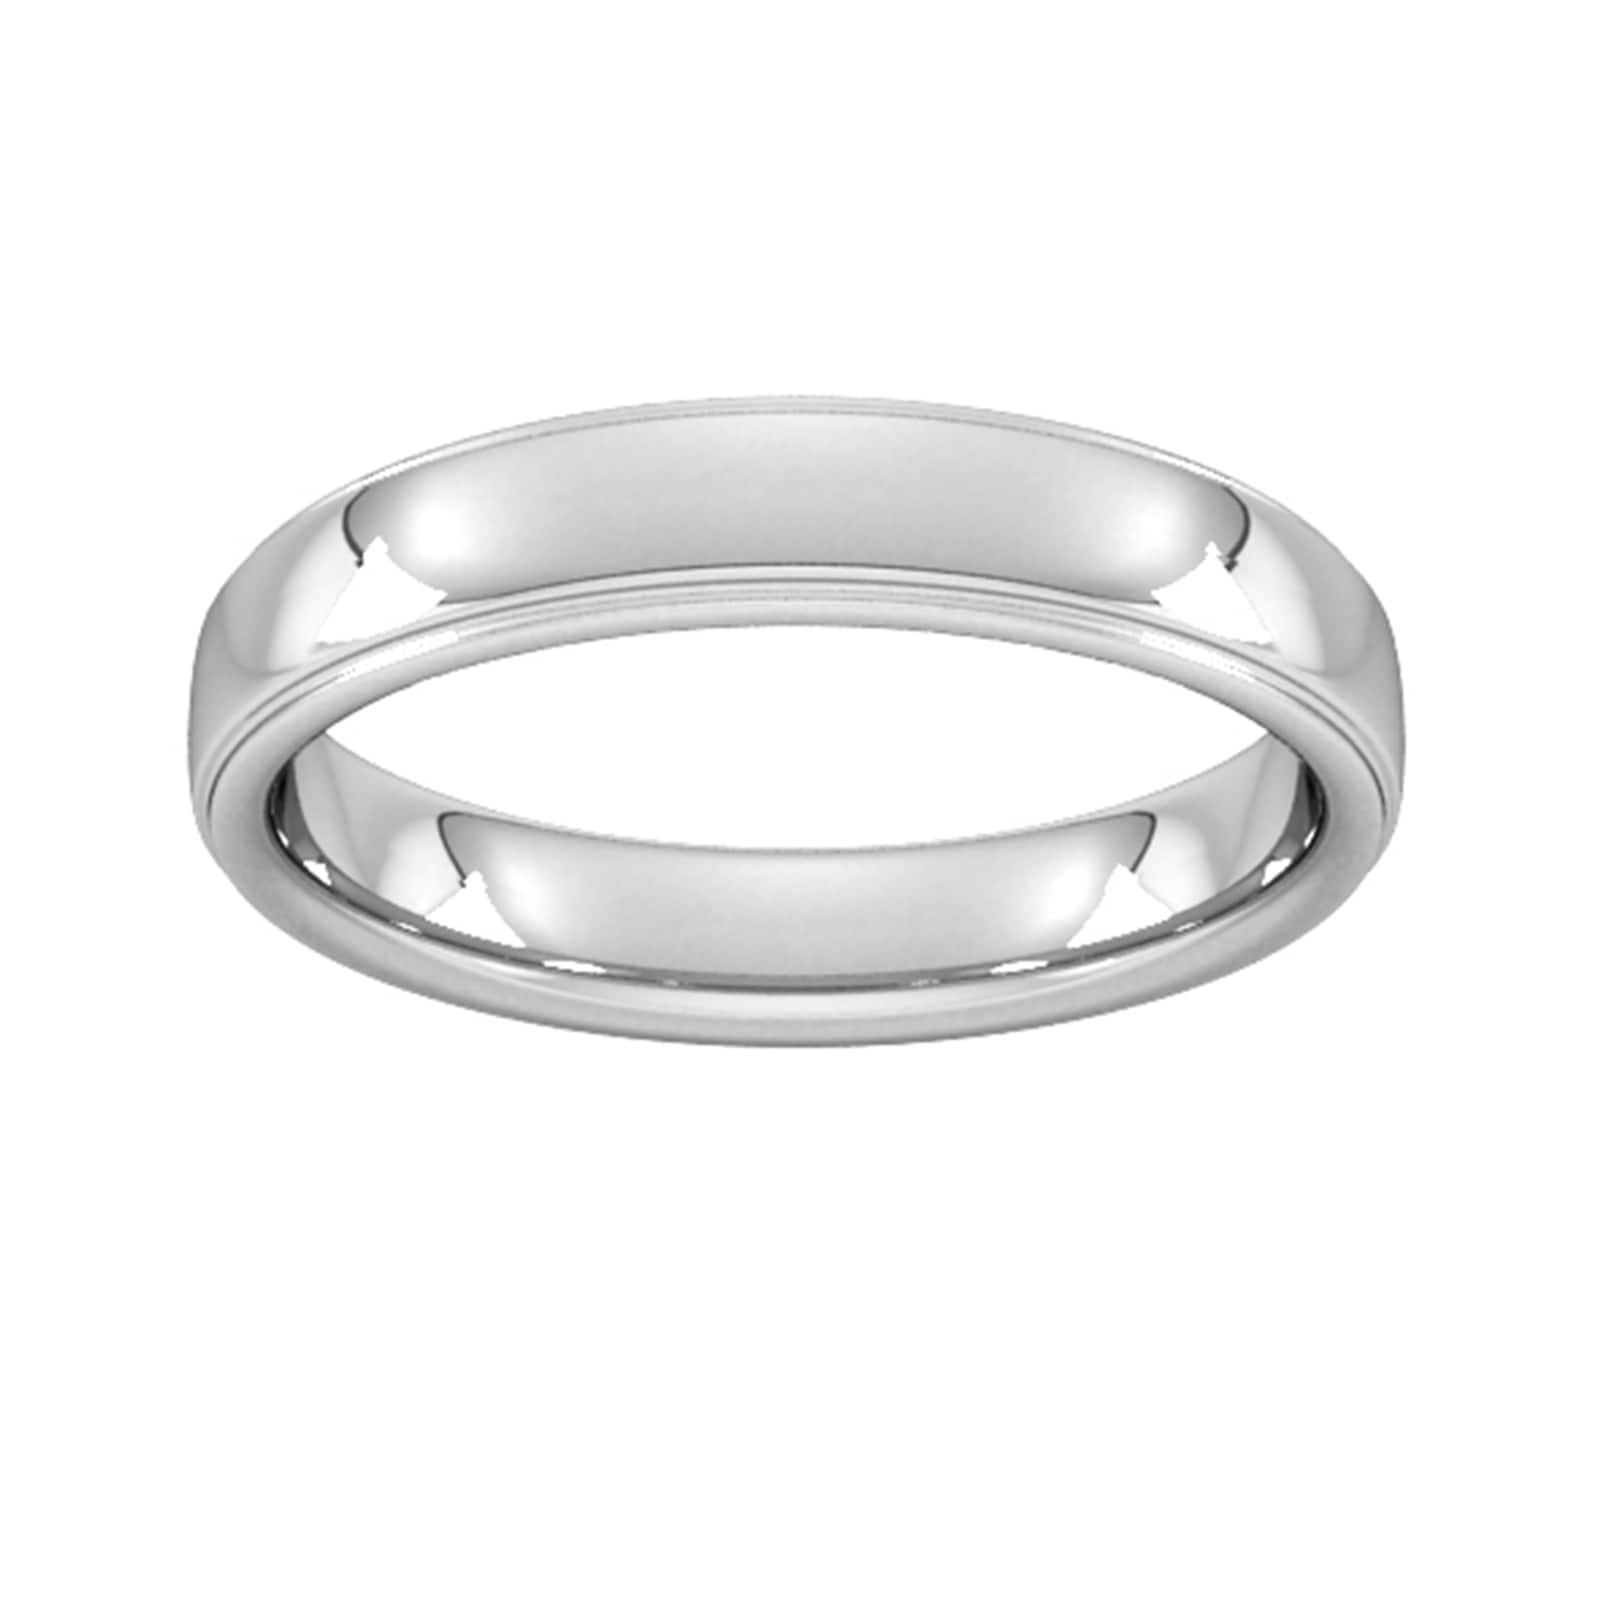 4mm Slight Court Standard Polished Finish With Grooves Wedding Ring In Platinum - Ring Size N